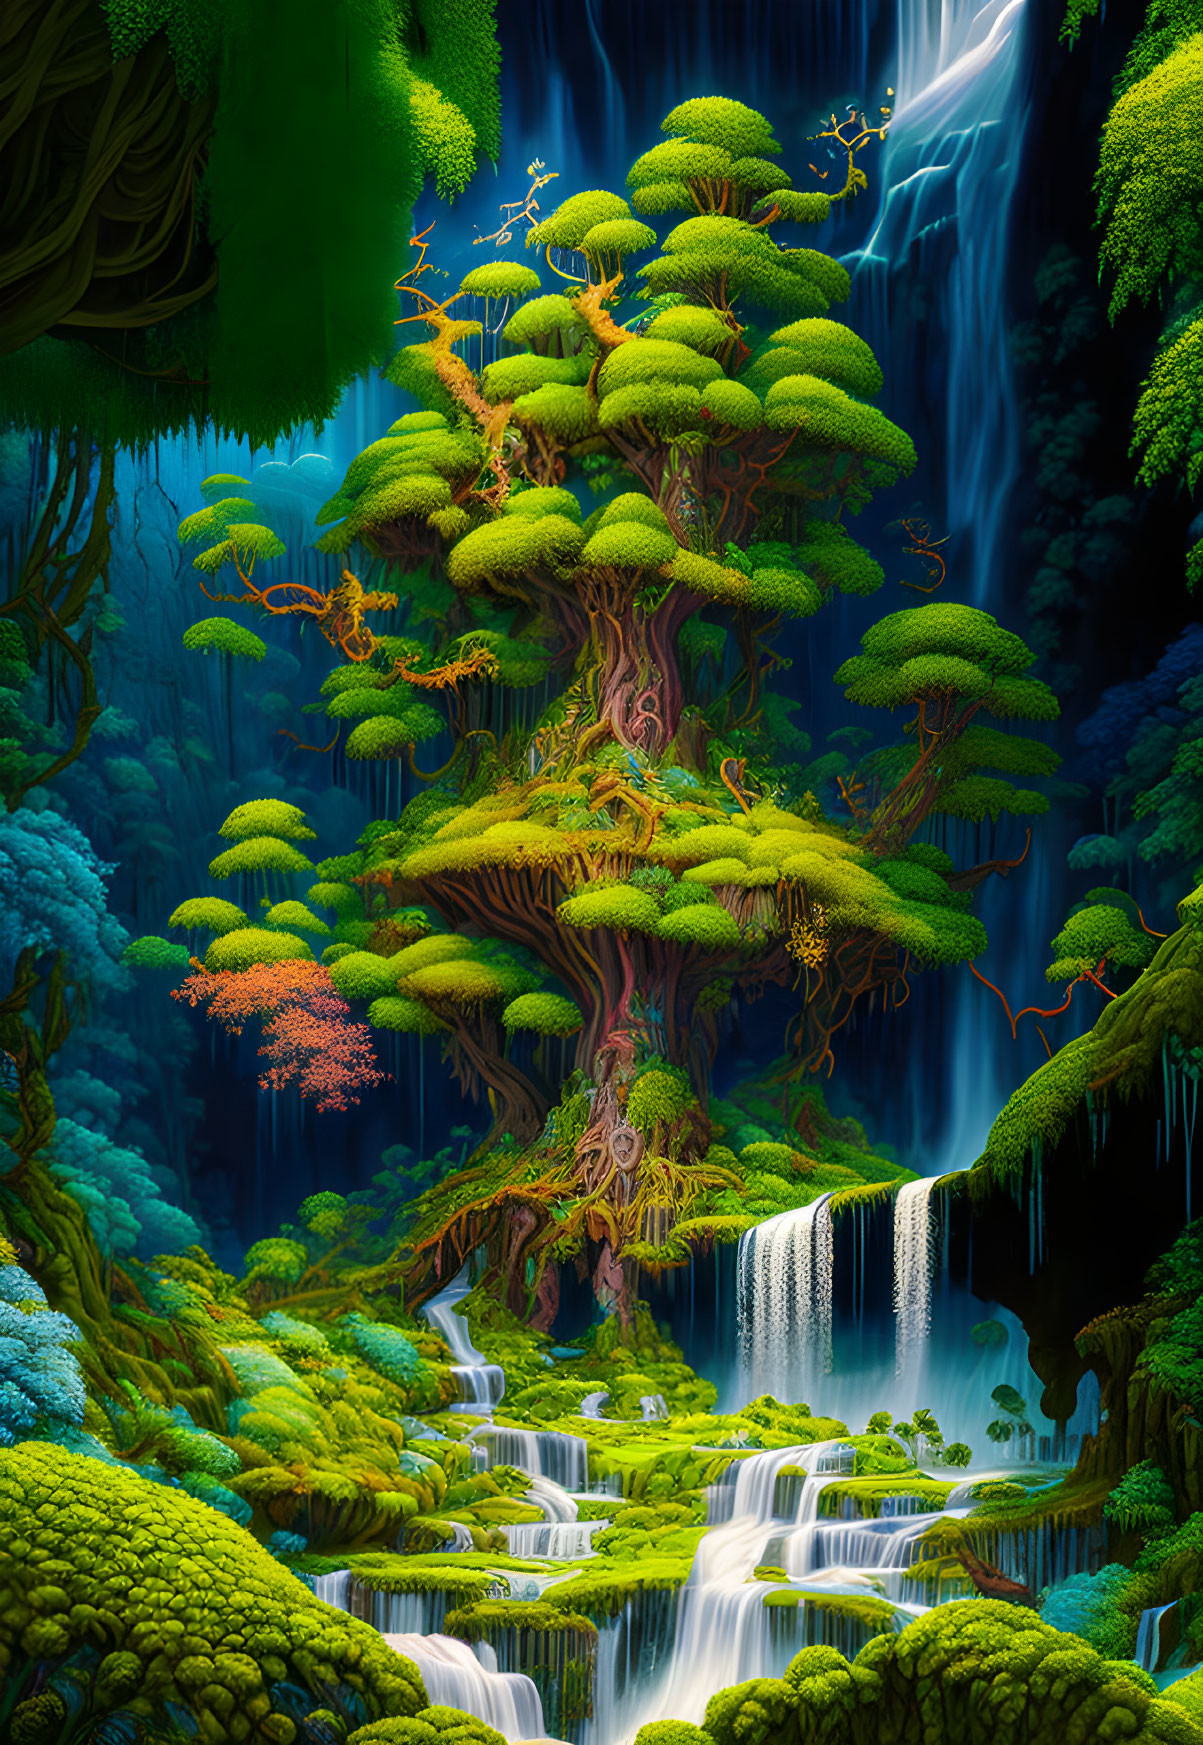 Majestic tree with lush green canopy in enchanted forest